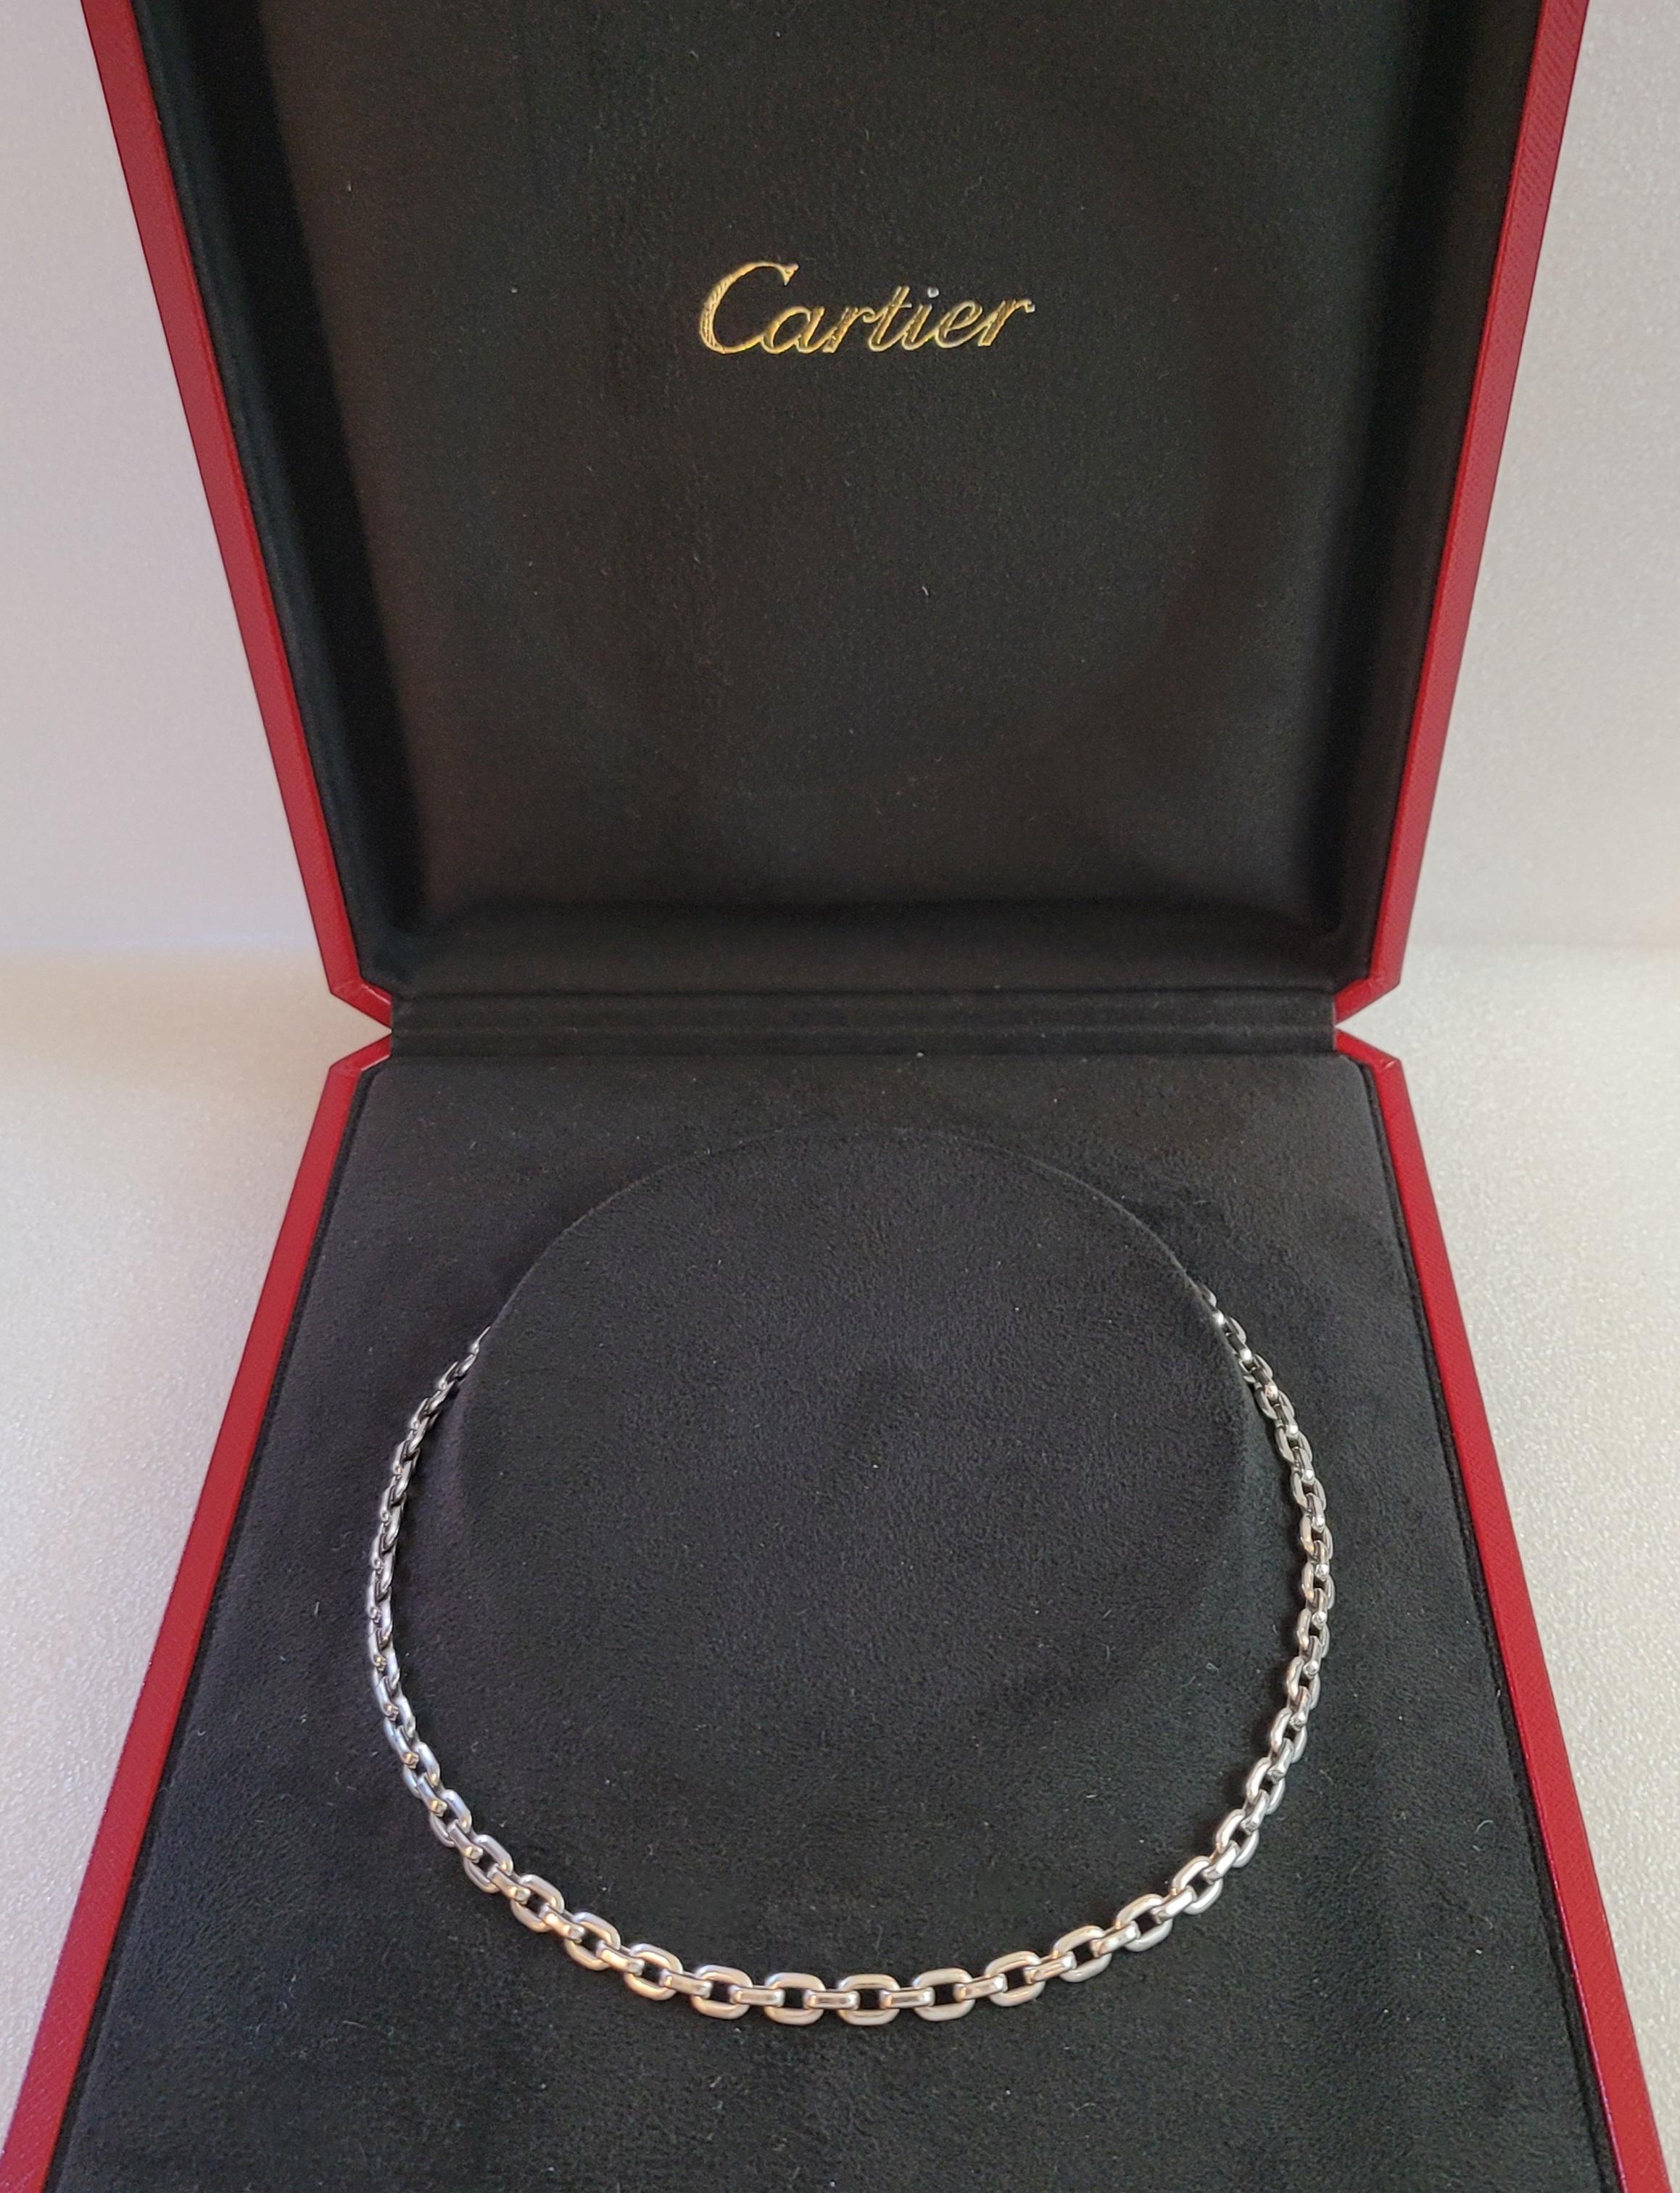 Cartier Meplat Women's Necklace Chain in 18K White Gold  Length 16.5'' Long In Excellent Condition For Sale In New York, NY